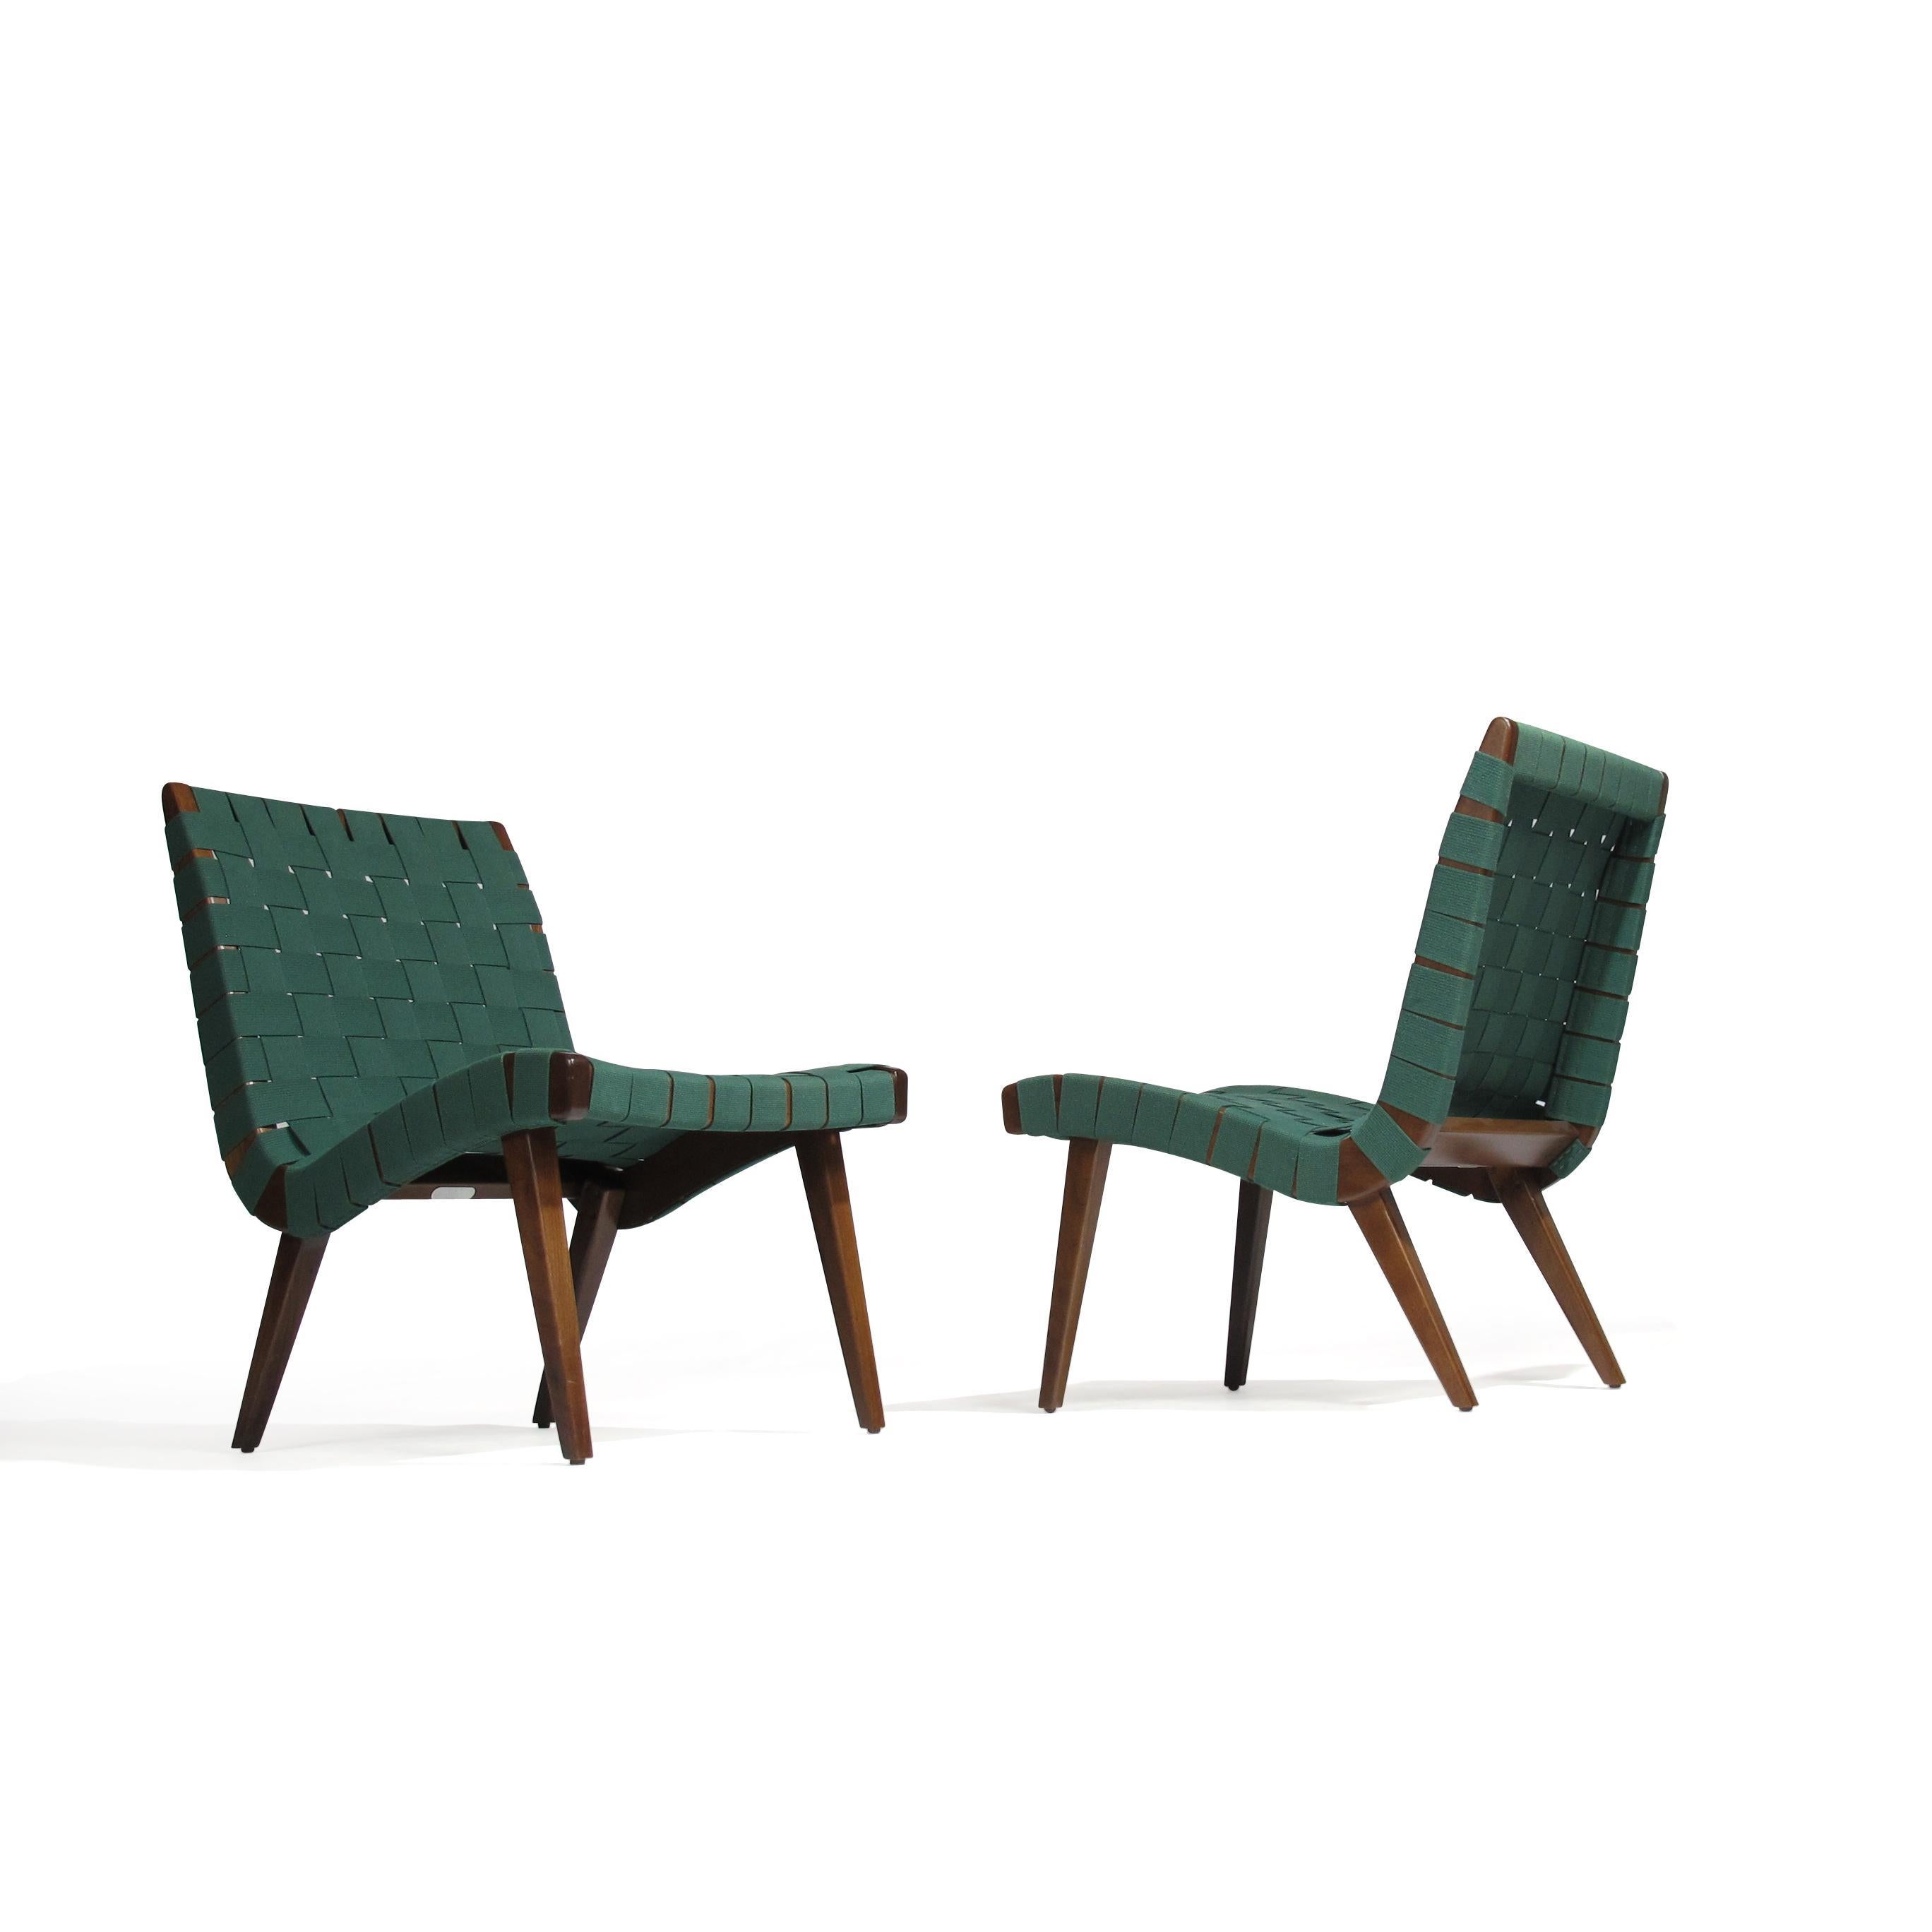 Mid-Century Modern Jens Risom for Knoll Studio Lounge Chairs